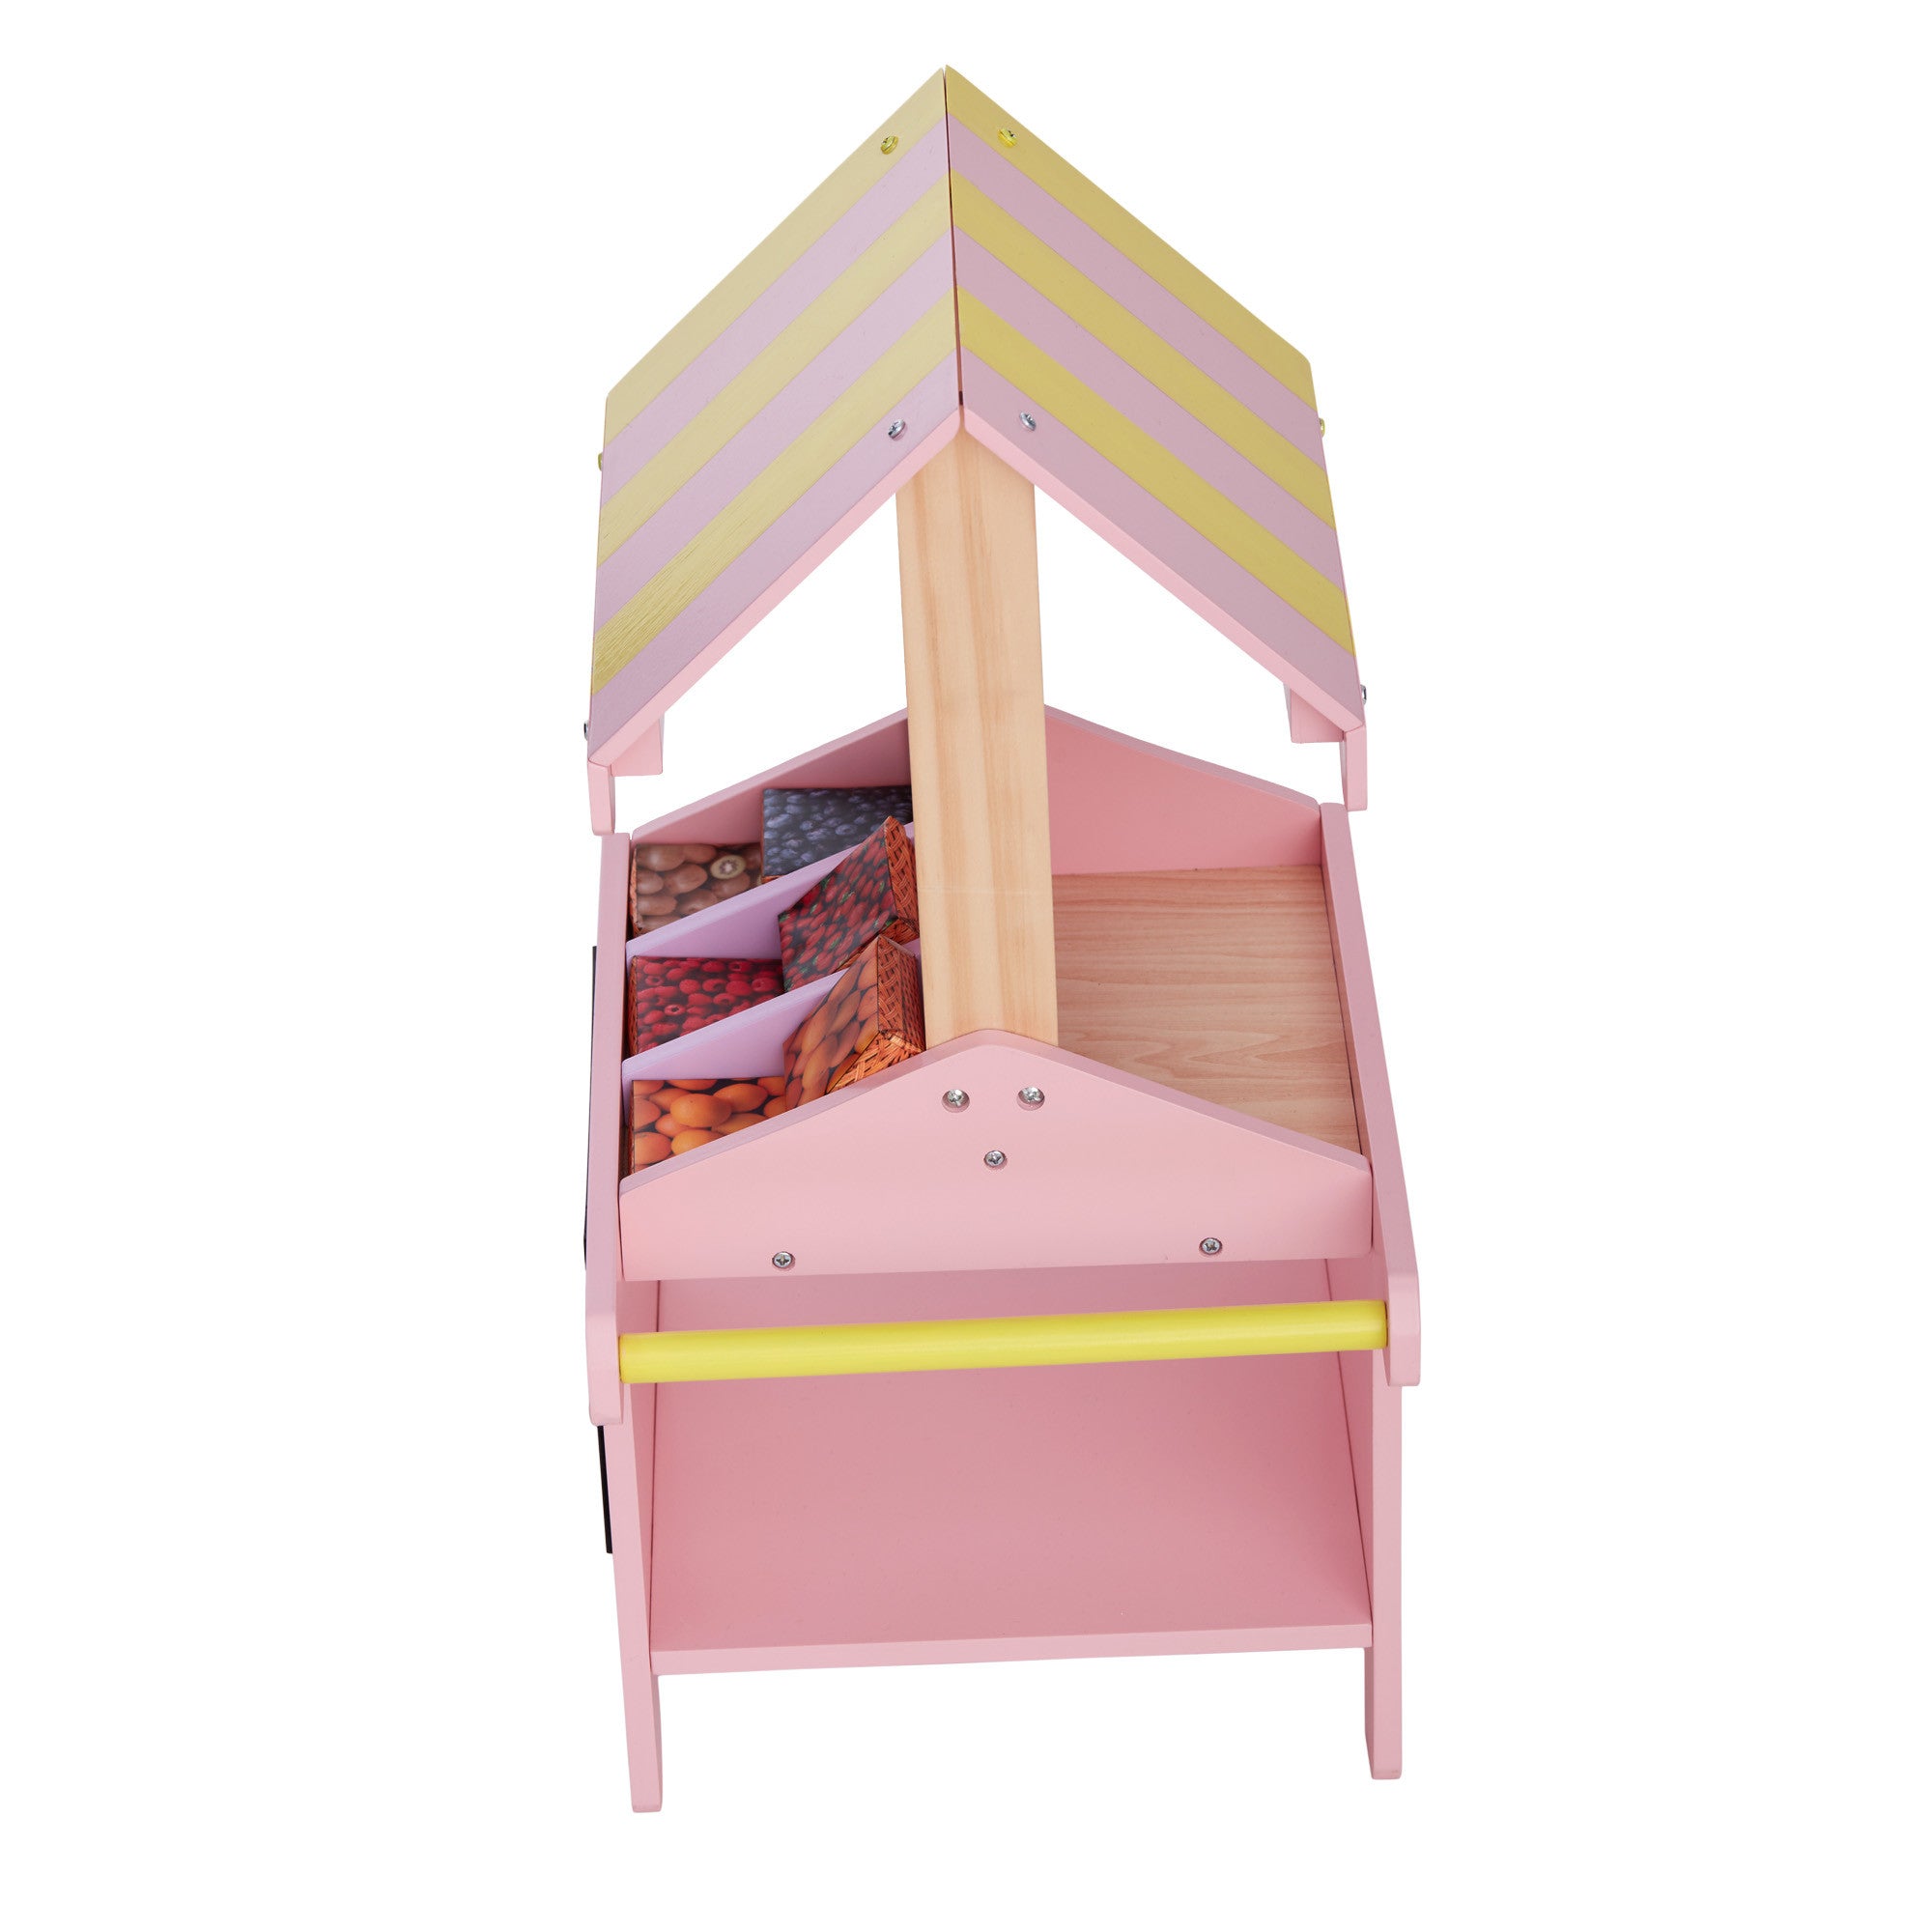 Olivia's Little World Modern Nordic Princess Doll Pastry Cart with Fruit Boxes, Pink